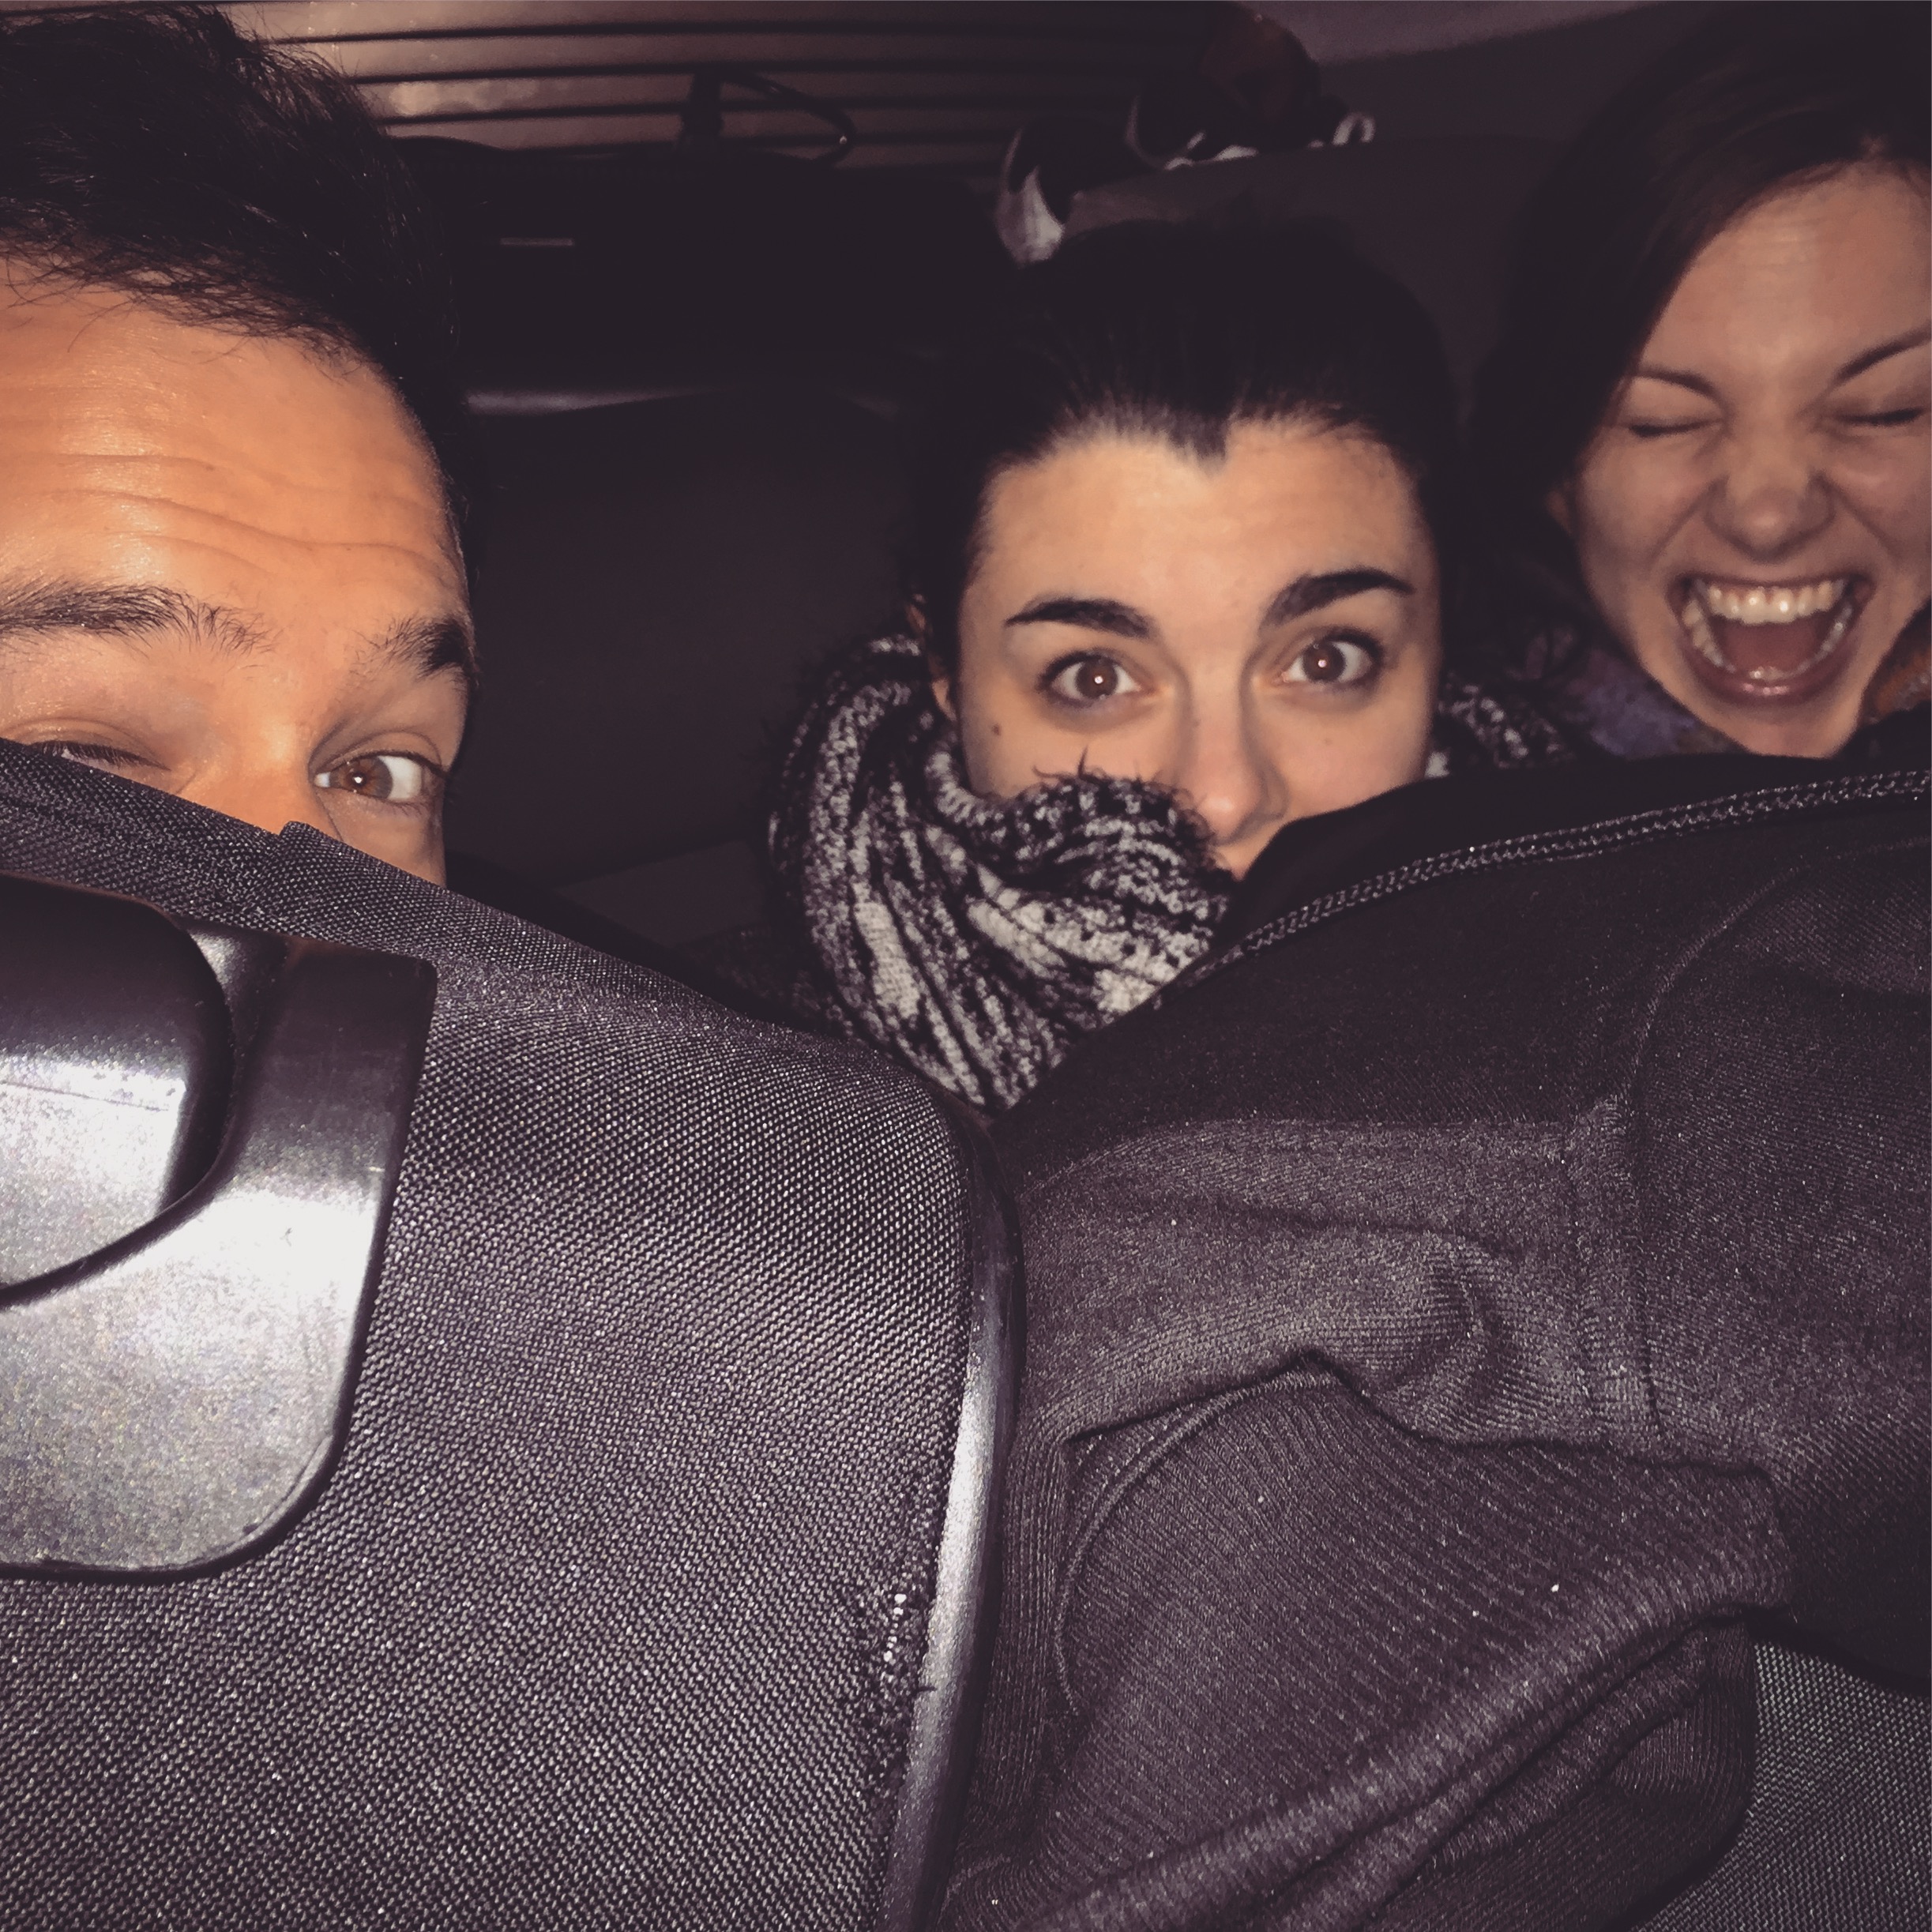 Toby, myself and Laura crammed in Luke's car at the end of our R&D week in the North East